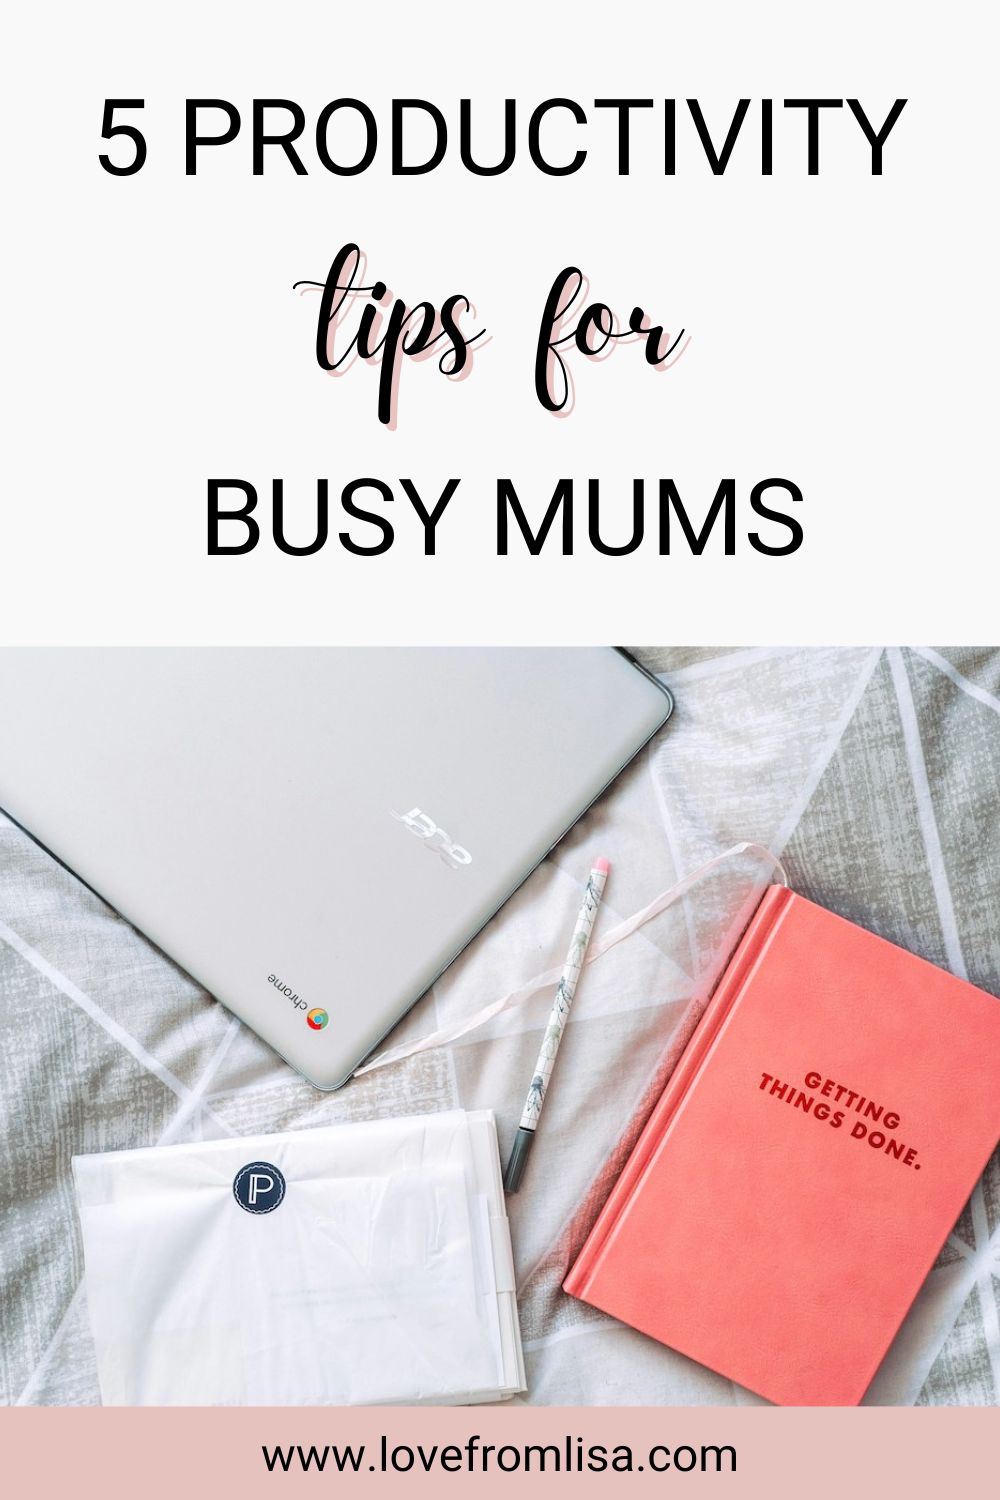 5 productivity tips for busy mums Pinterest graphic